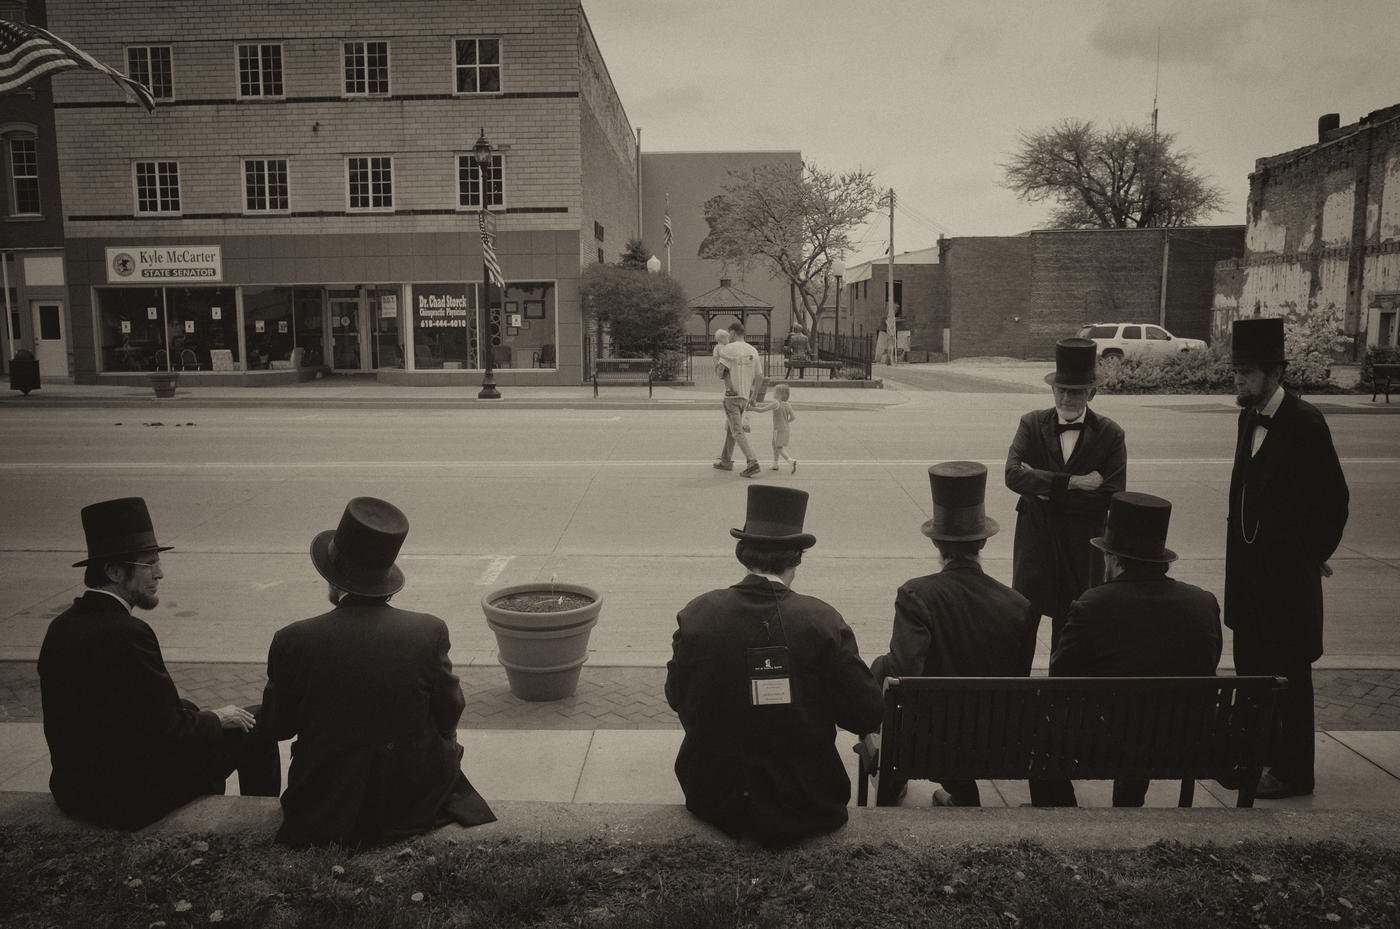 After the parade. : The  Lincolns - a Convention : David Burnett | Photographer